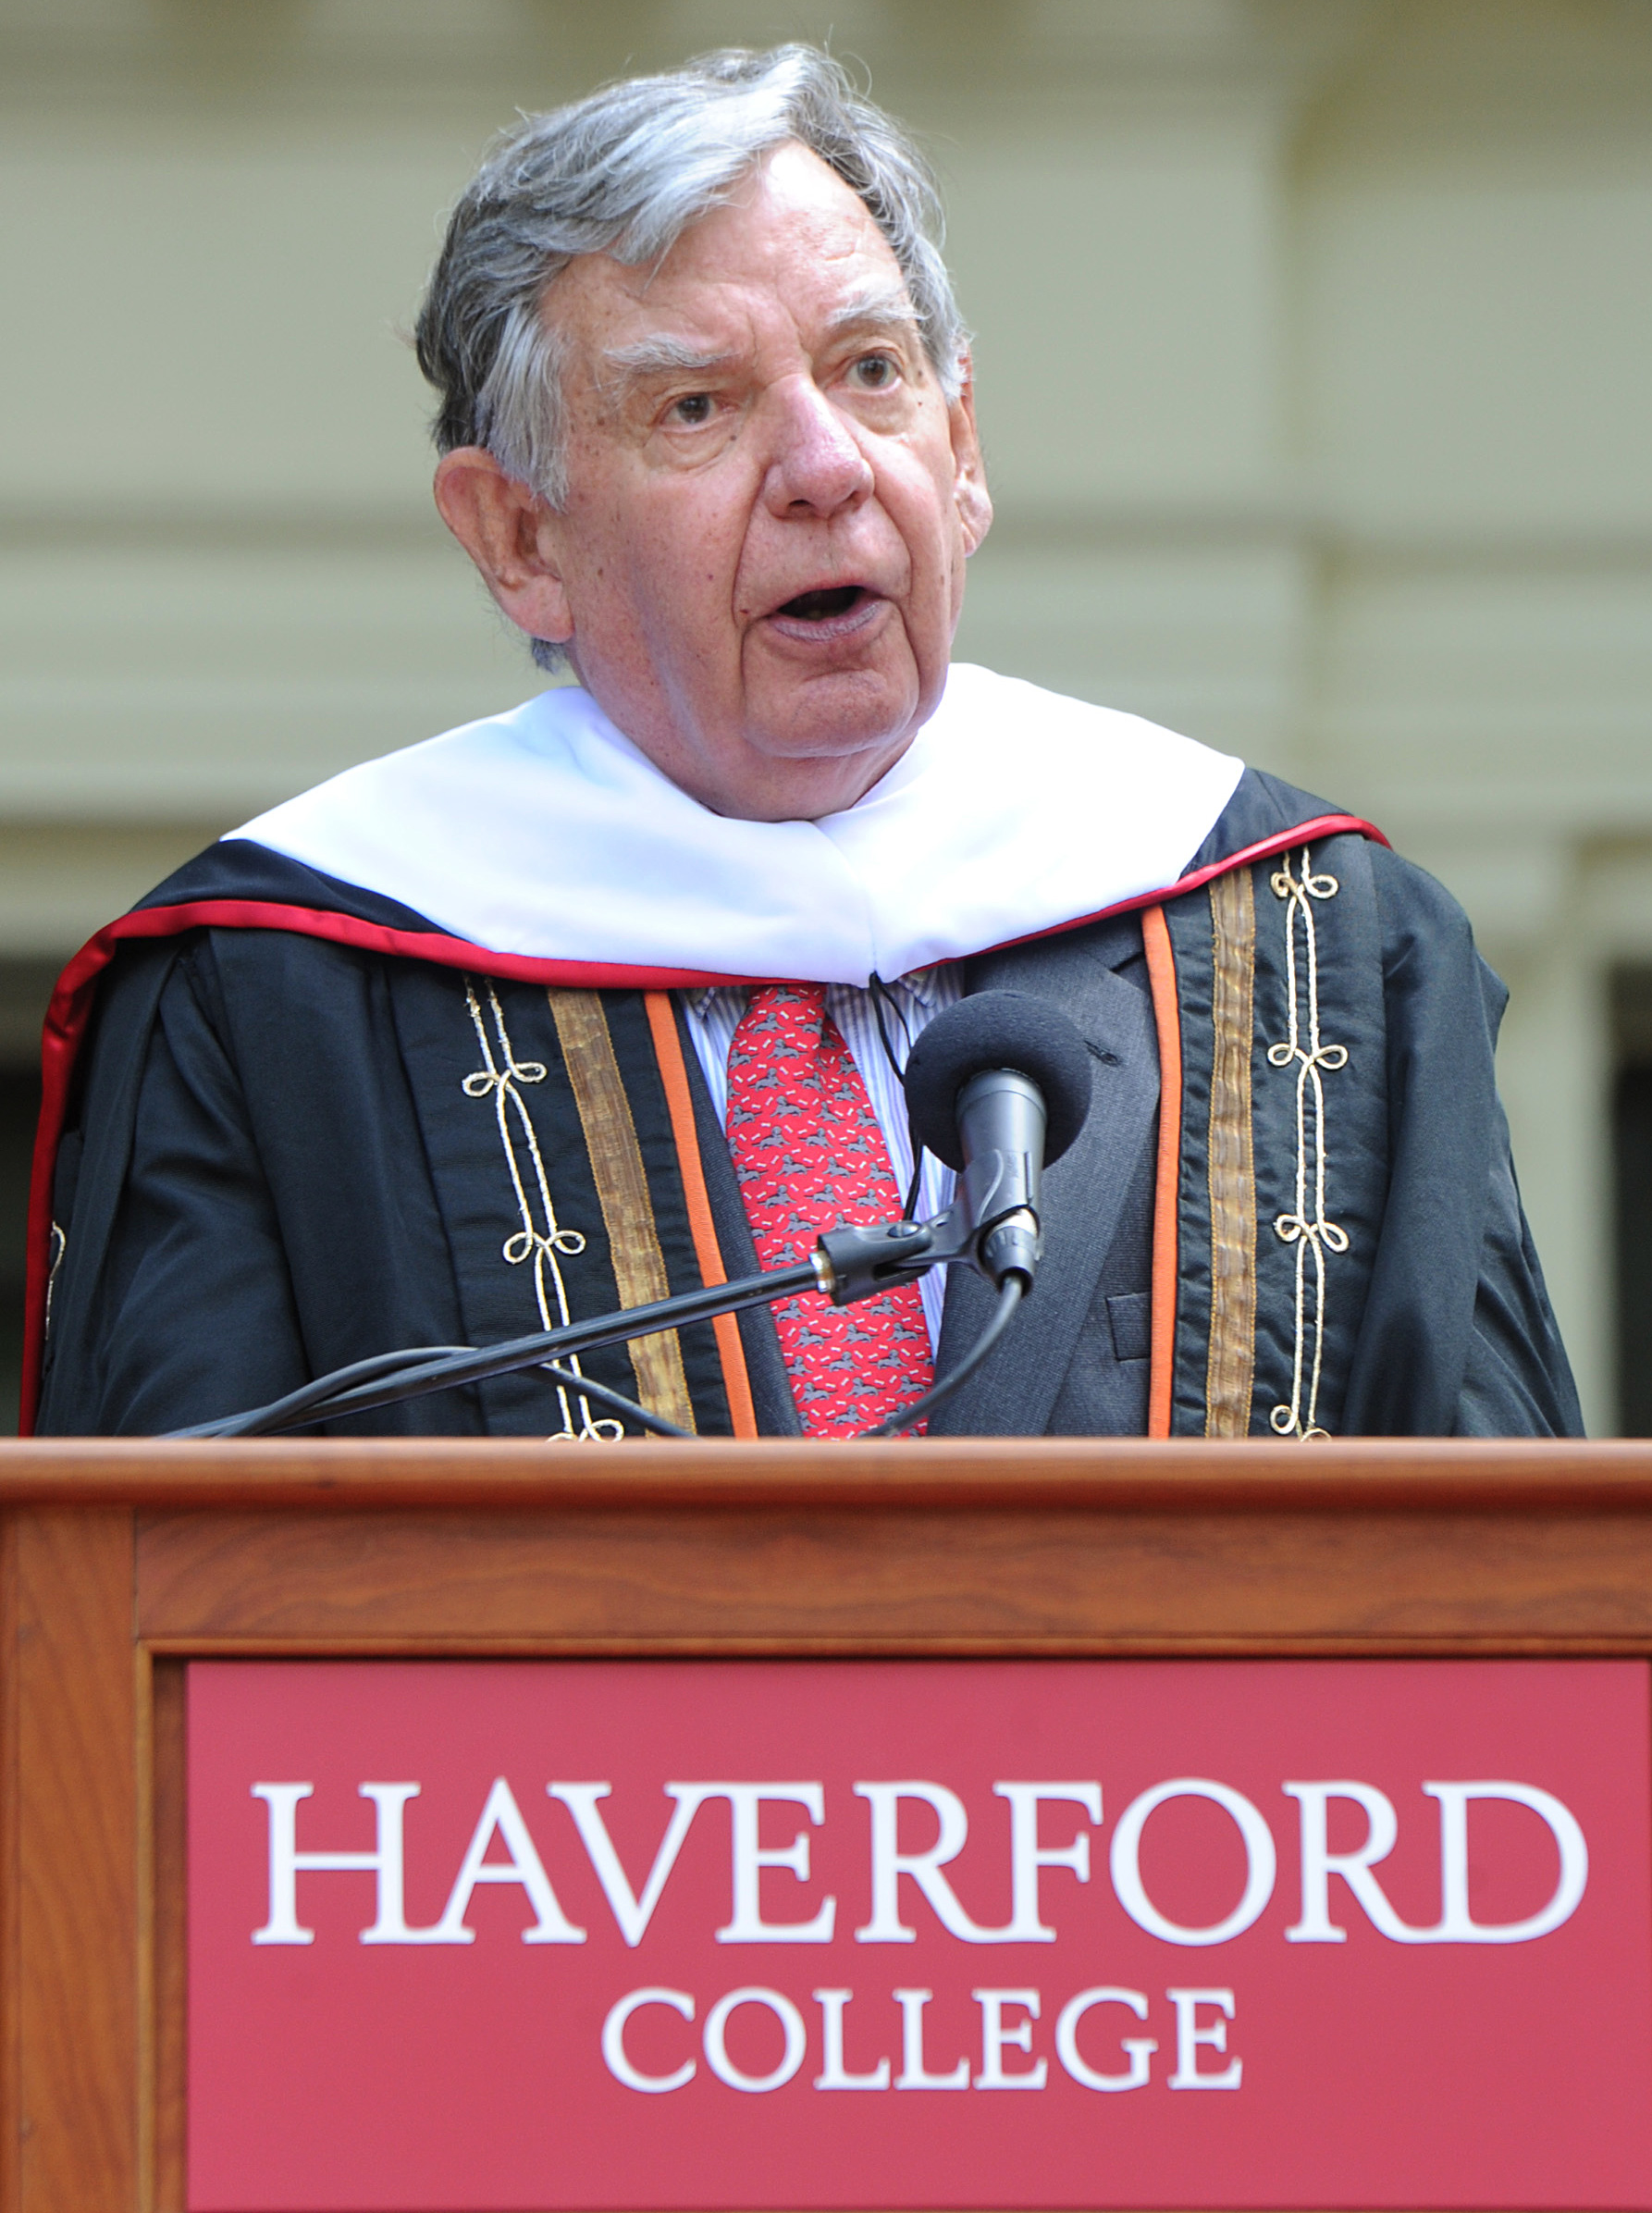 William Bowen, former president of Princeton University, delivers his commencement speech to the graduates of Haverford College on Sunday. He called the controversy over a planned speaker sad and troubling. (Clem Murray—AP)